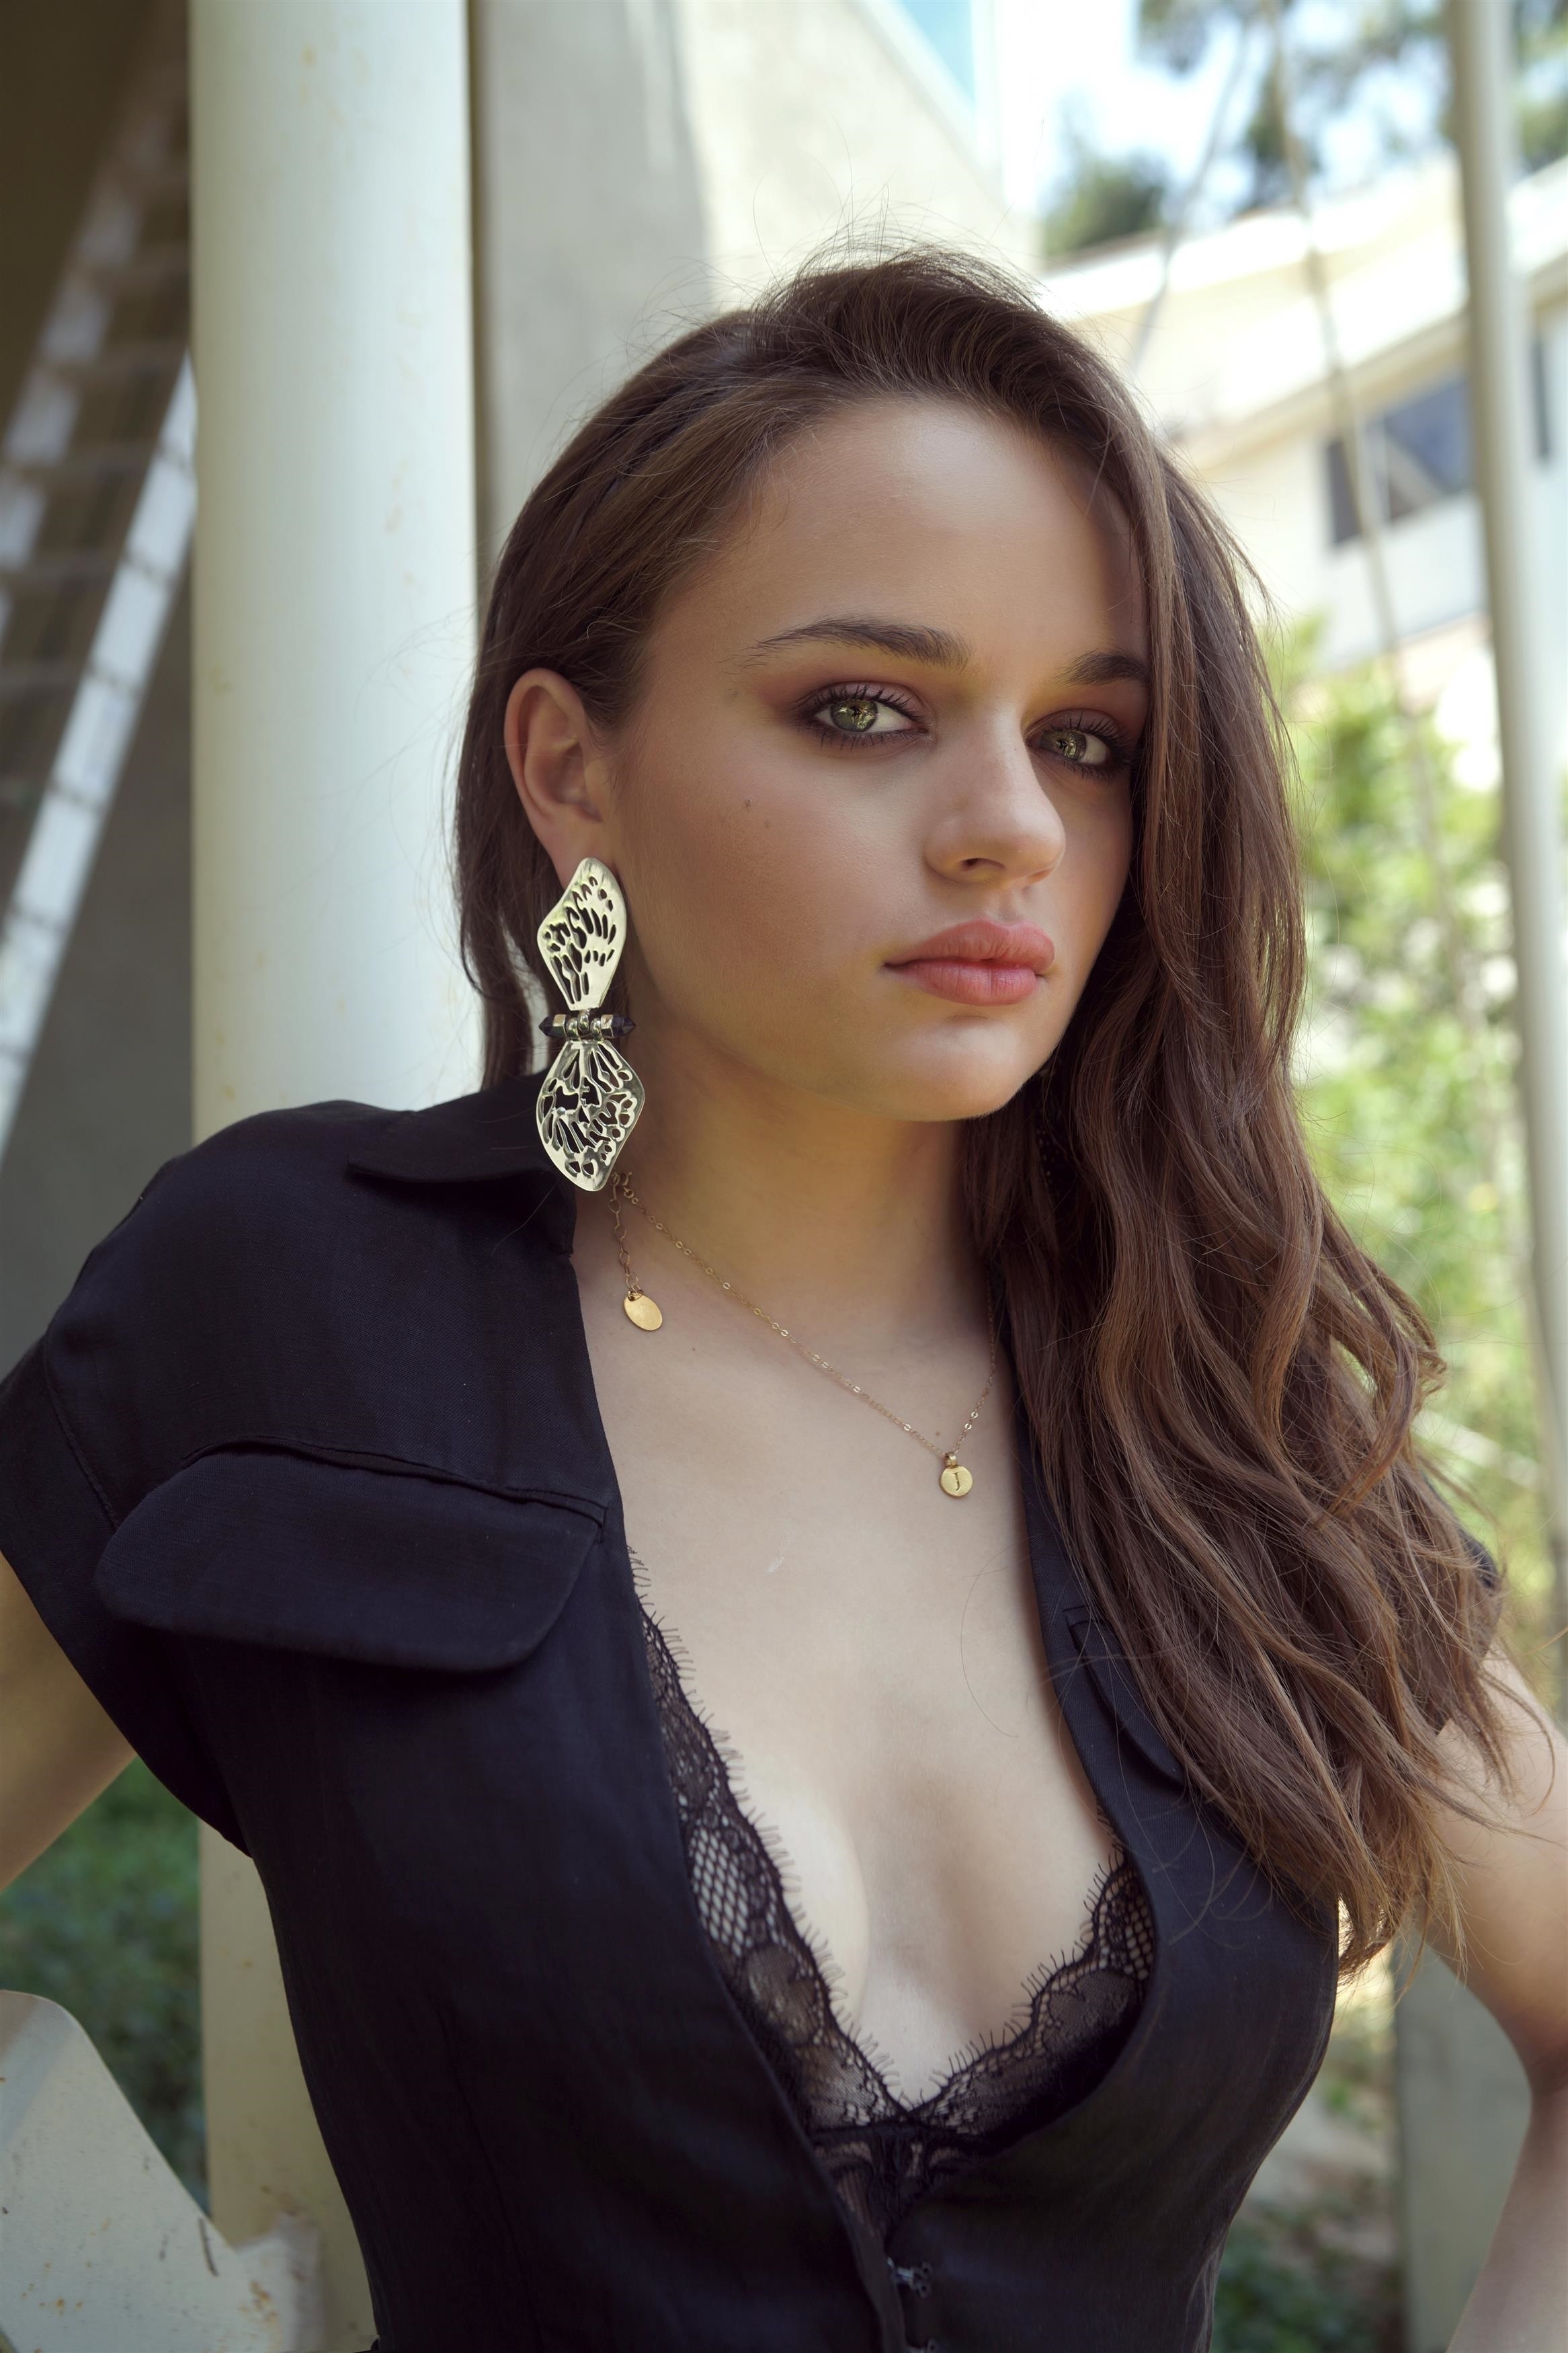 Photos n°4 : Joey King Showing Some Cleavage!